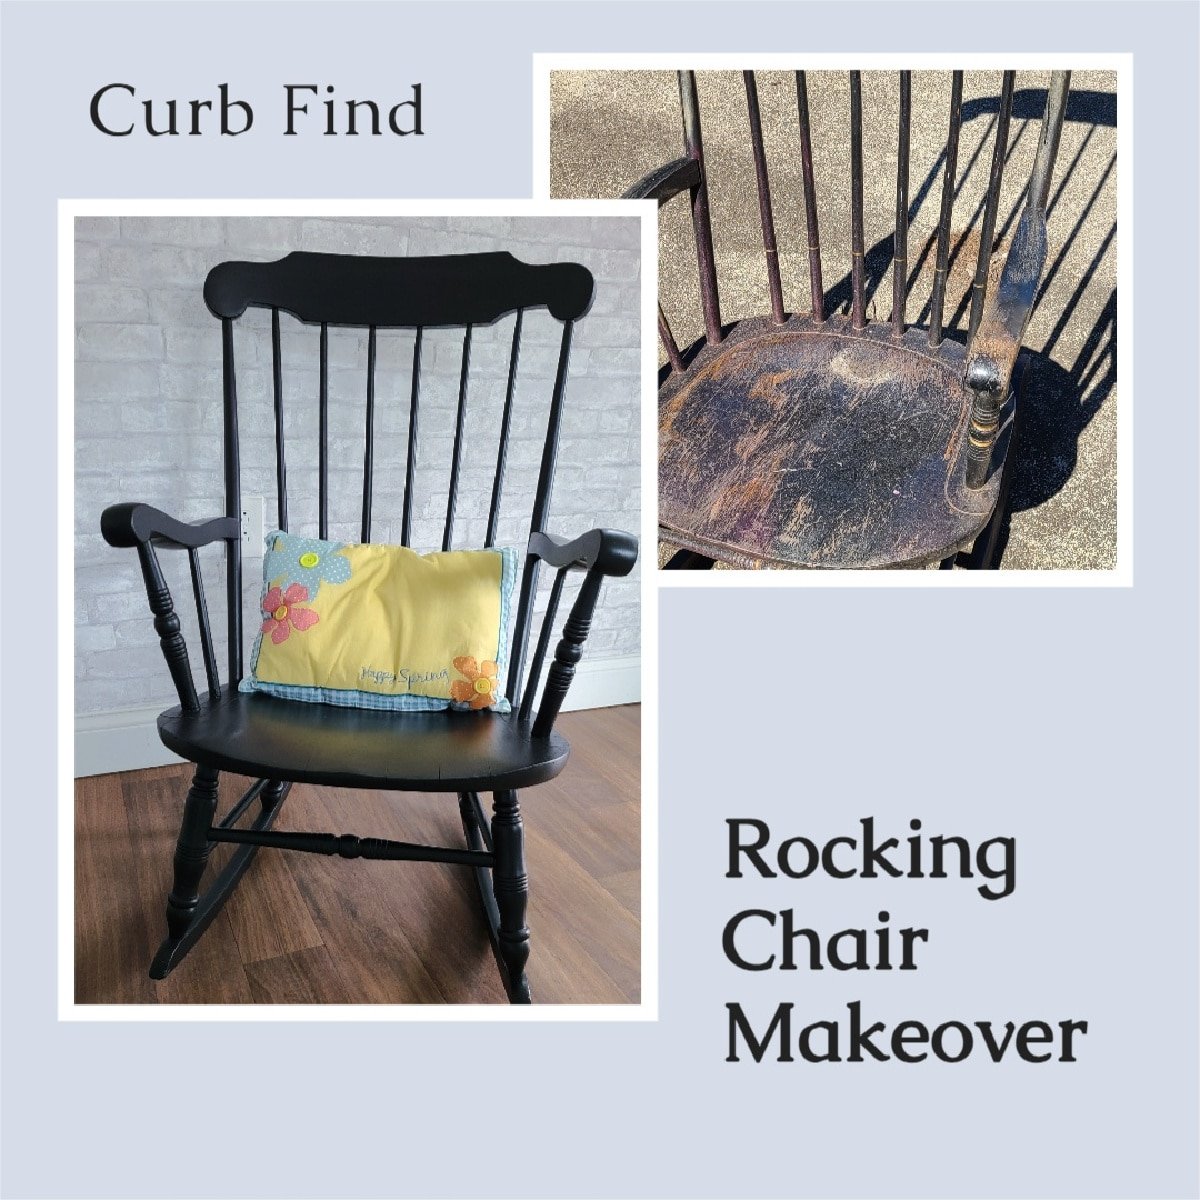 How to Make DIY Wooden Rocking Chair Cushions